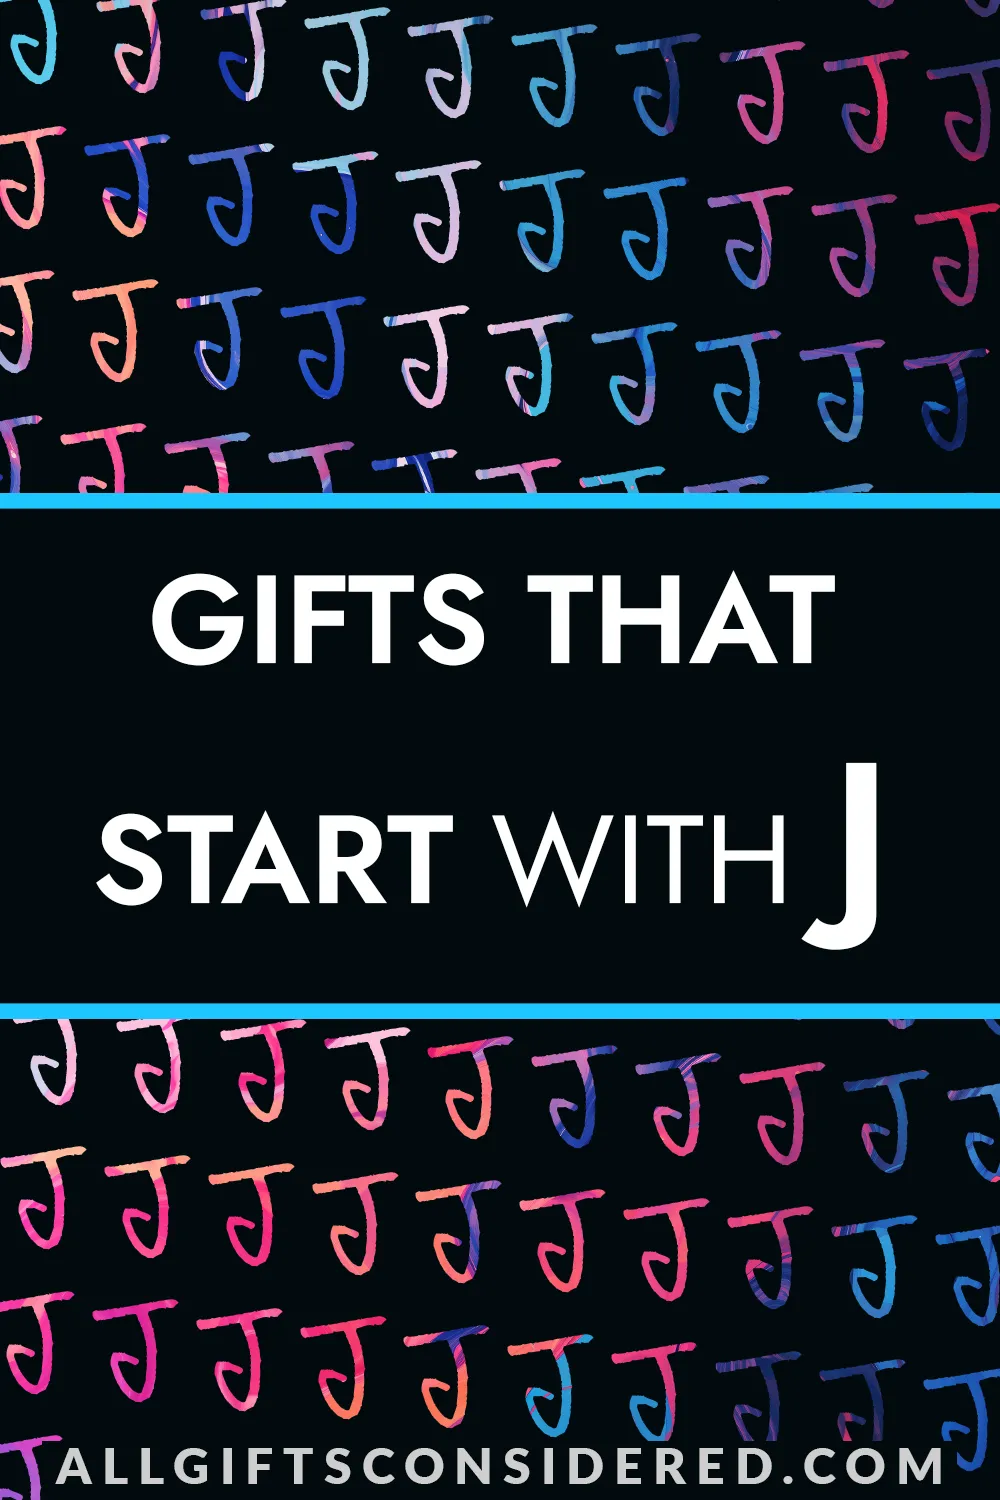 gift ideas that start with j - feature image